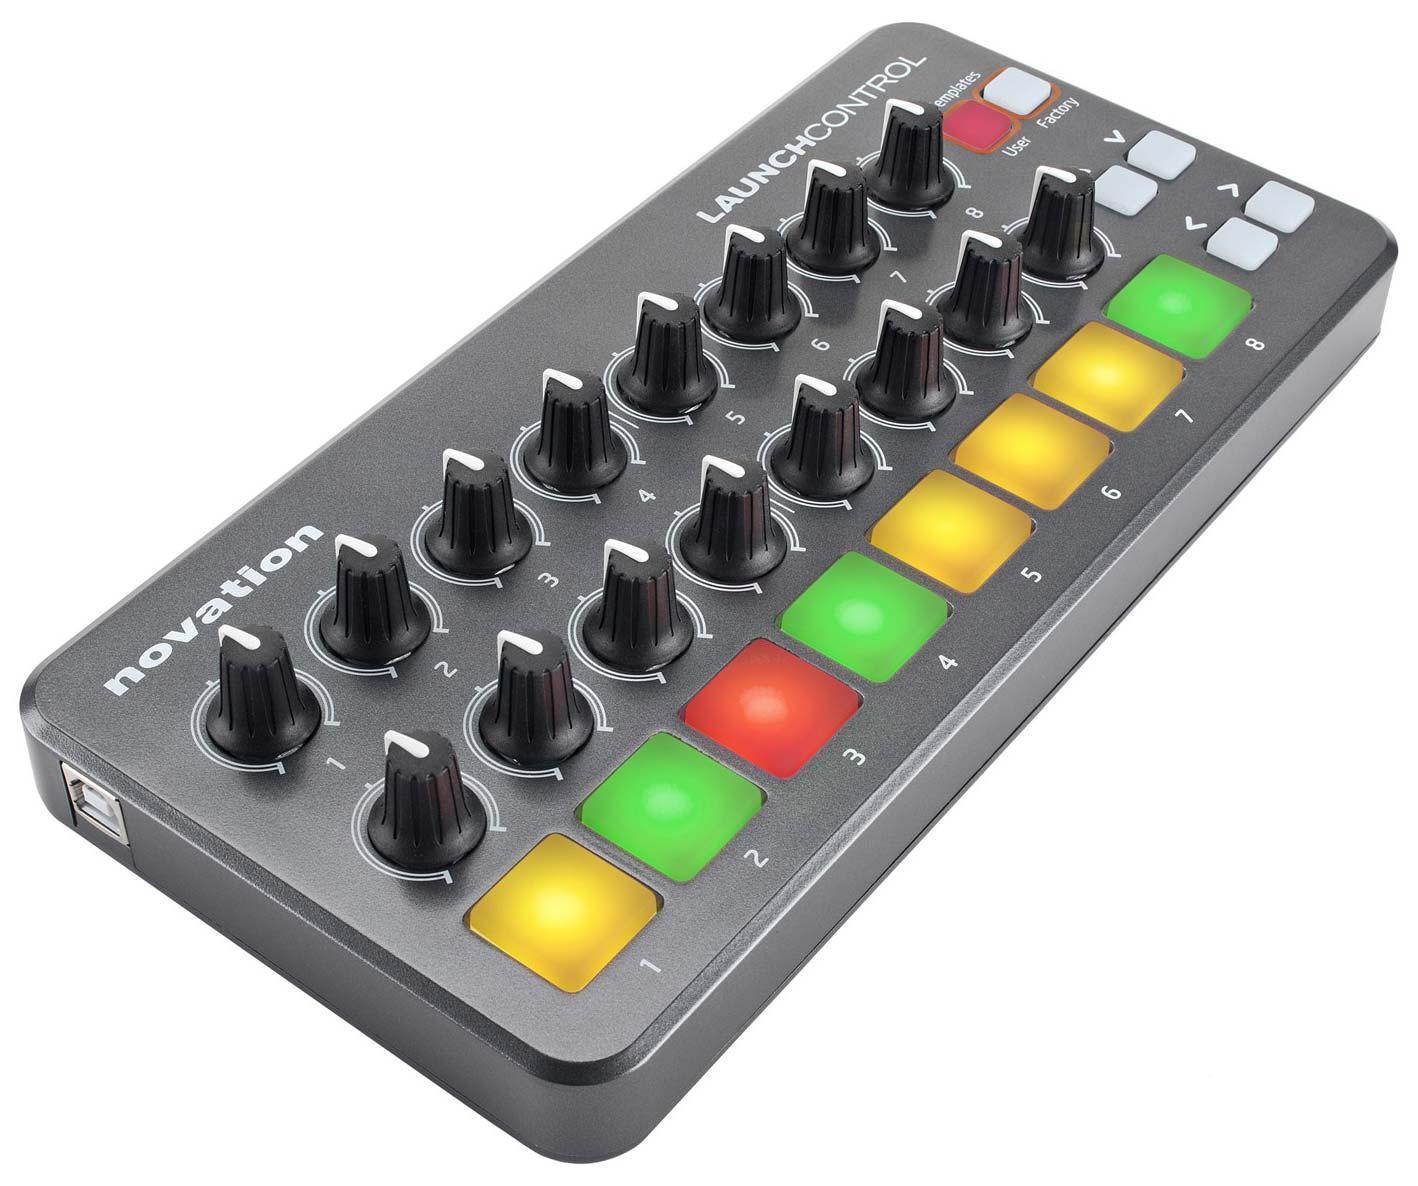 NOVATION LAUNCH CONTROL PORTABLE USB MIDI CONTROLLER WITH 16 ASSIGNABLE KNOBS AND EIGHT PADS, NOVATION, CONTROL SURFACE, novation-launch-control-with-8x-multicolour-backlit-buttons-and-16-knots, ZOSO MUSIC SDN BHD